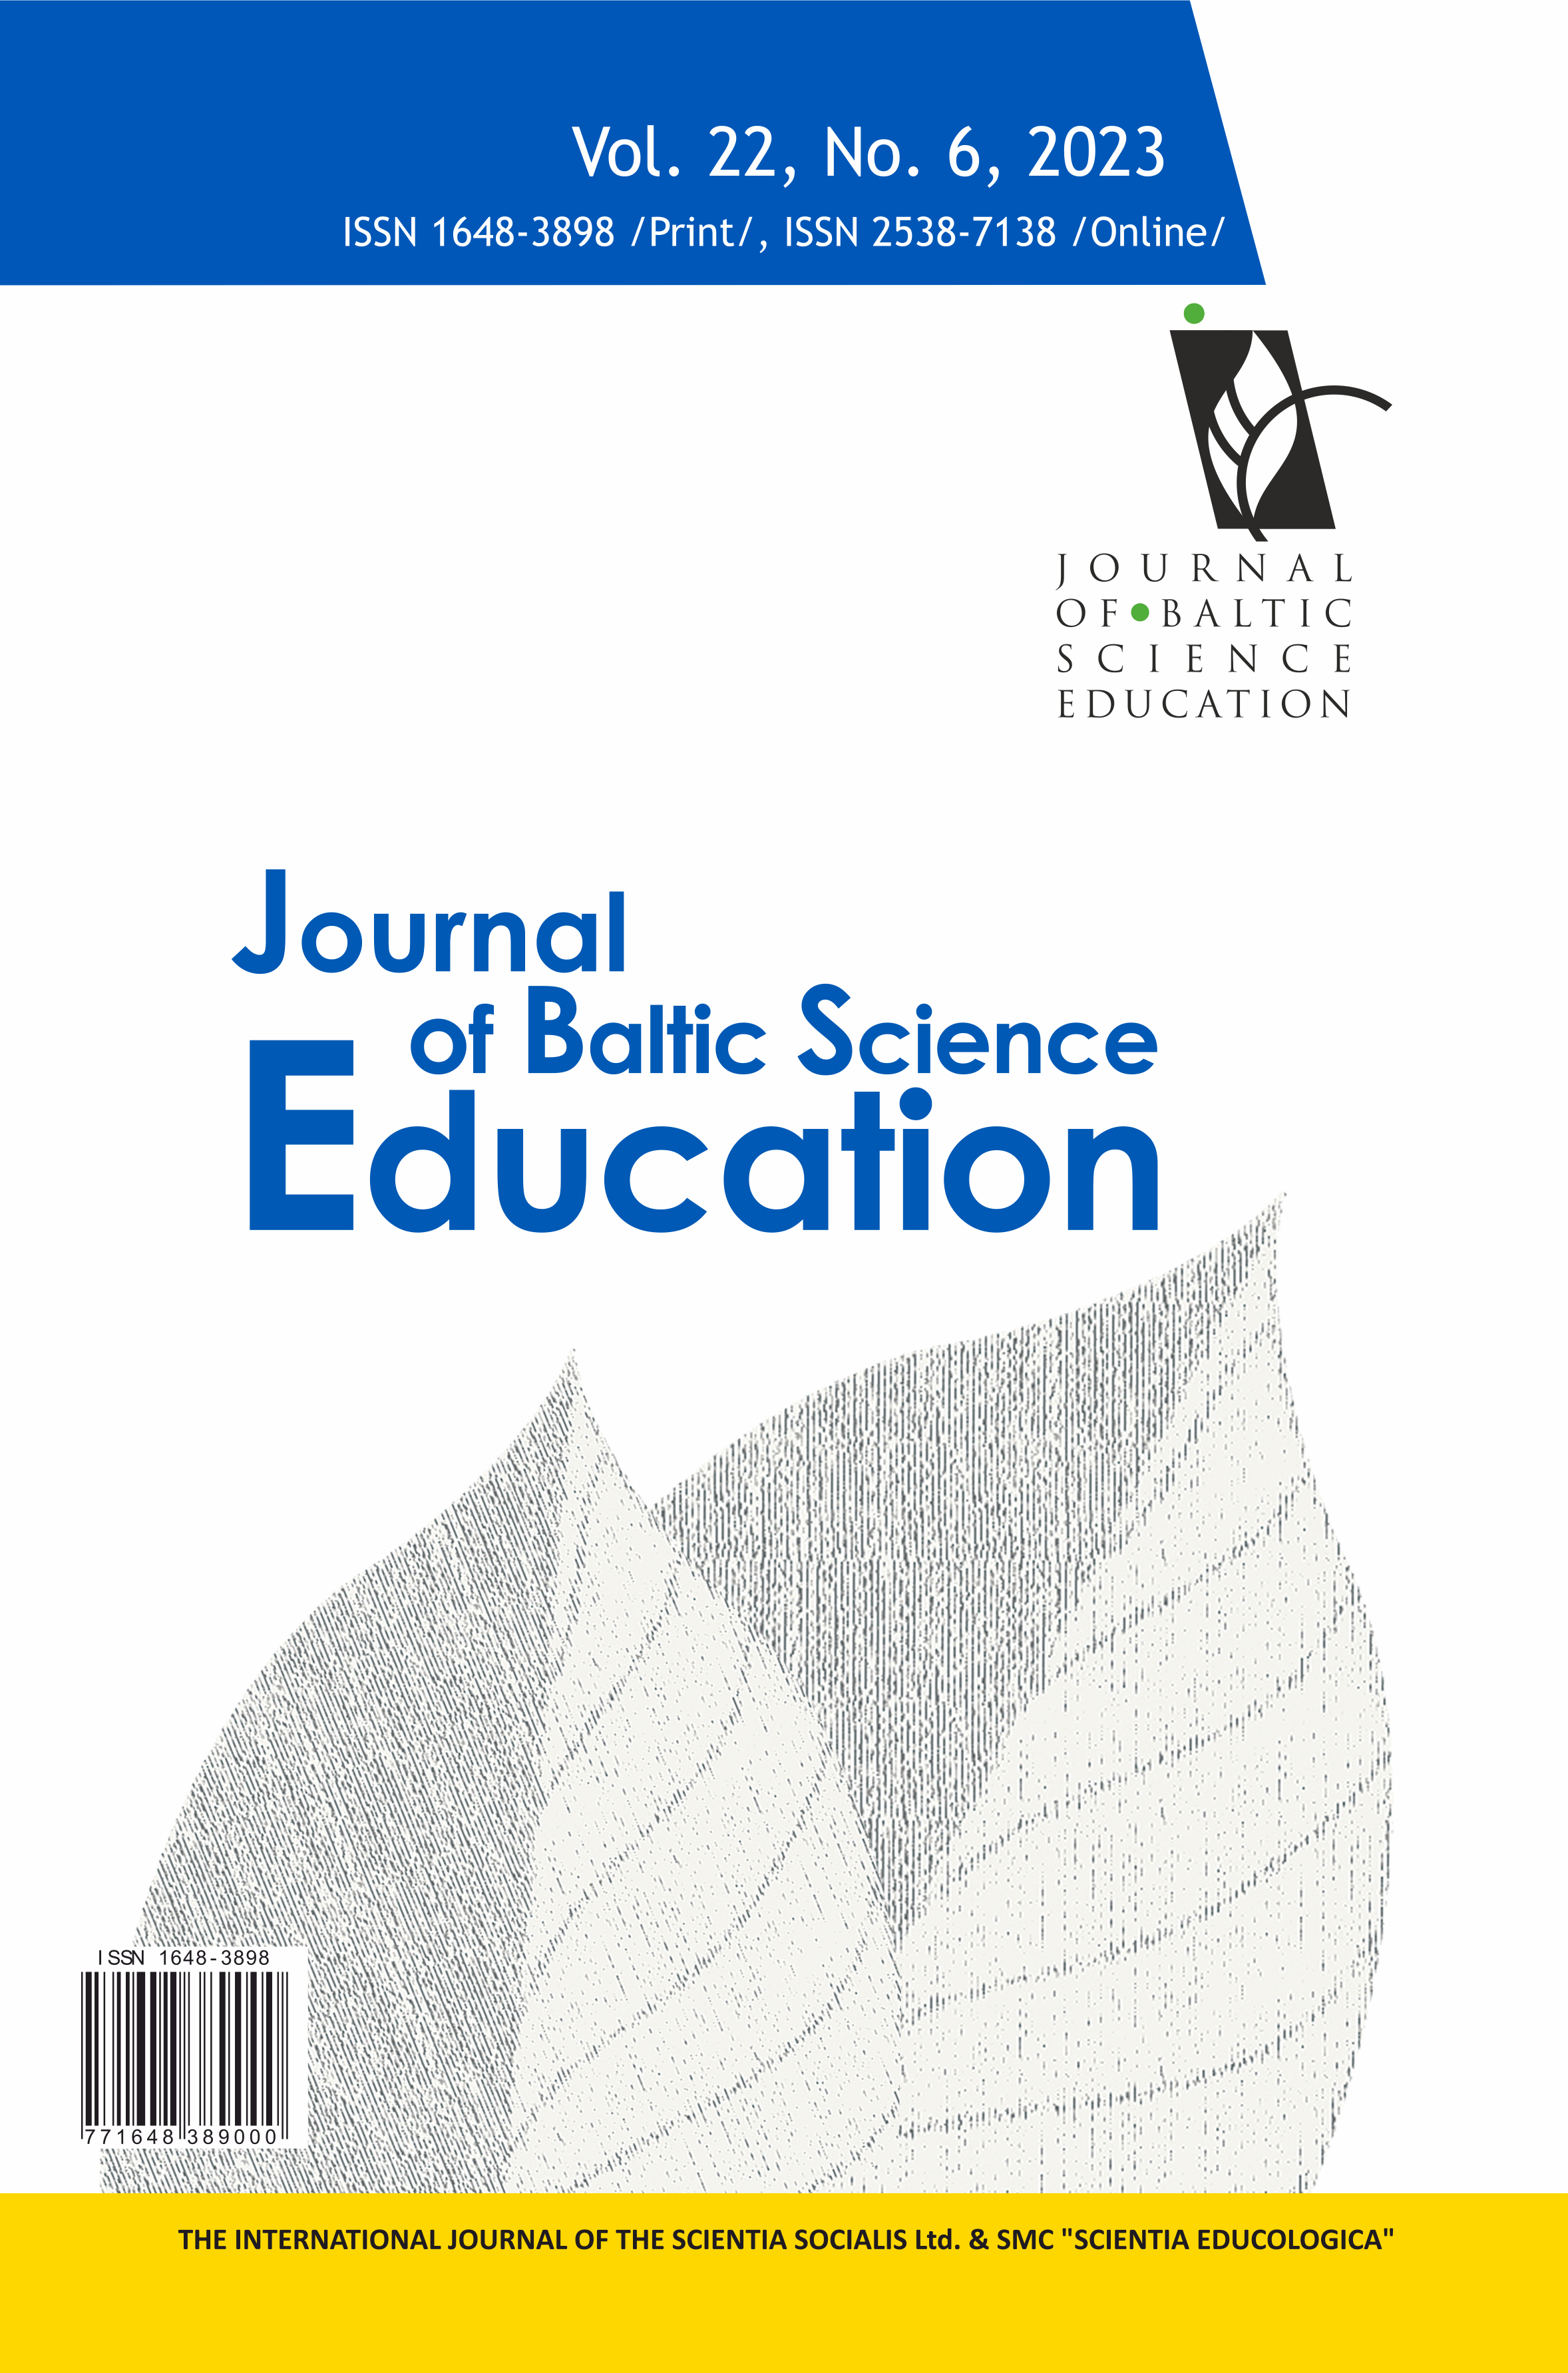 A BIBLIOMETRIC ANALYSIS OF LITERATURE ON ATTITUDES IN STEM EDUCATION IN 2008-2022